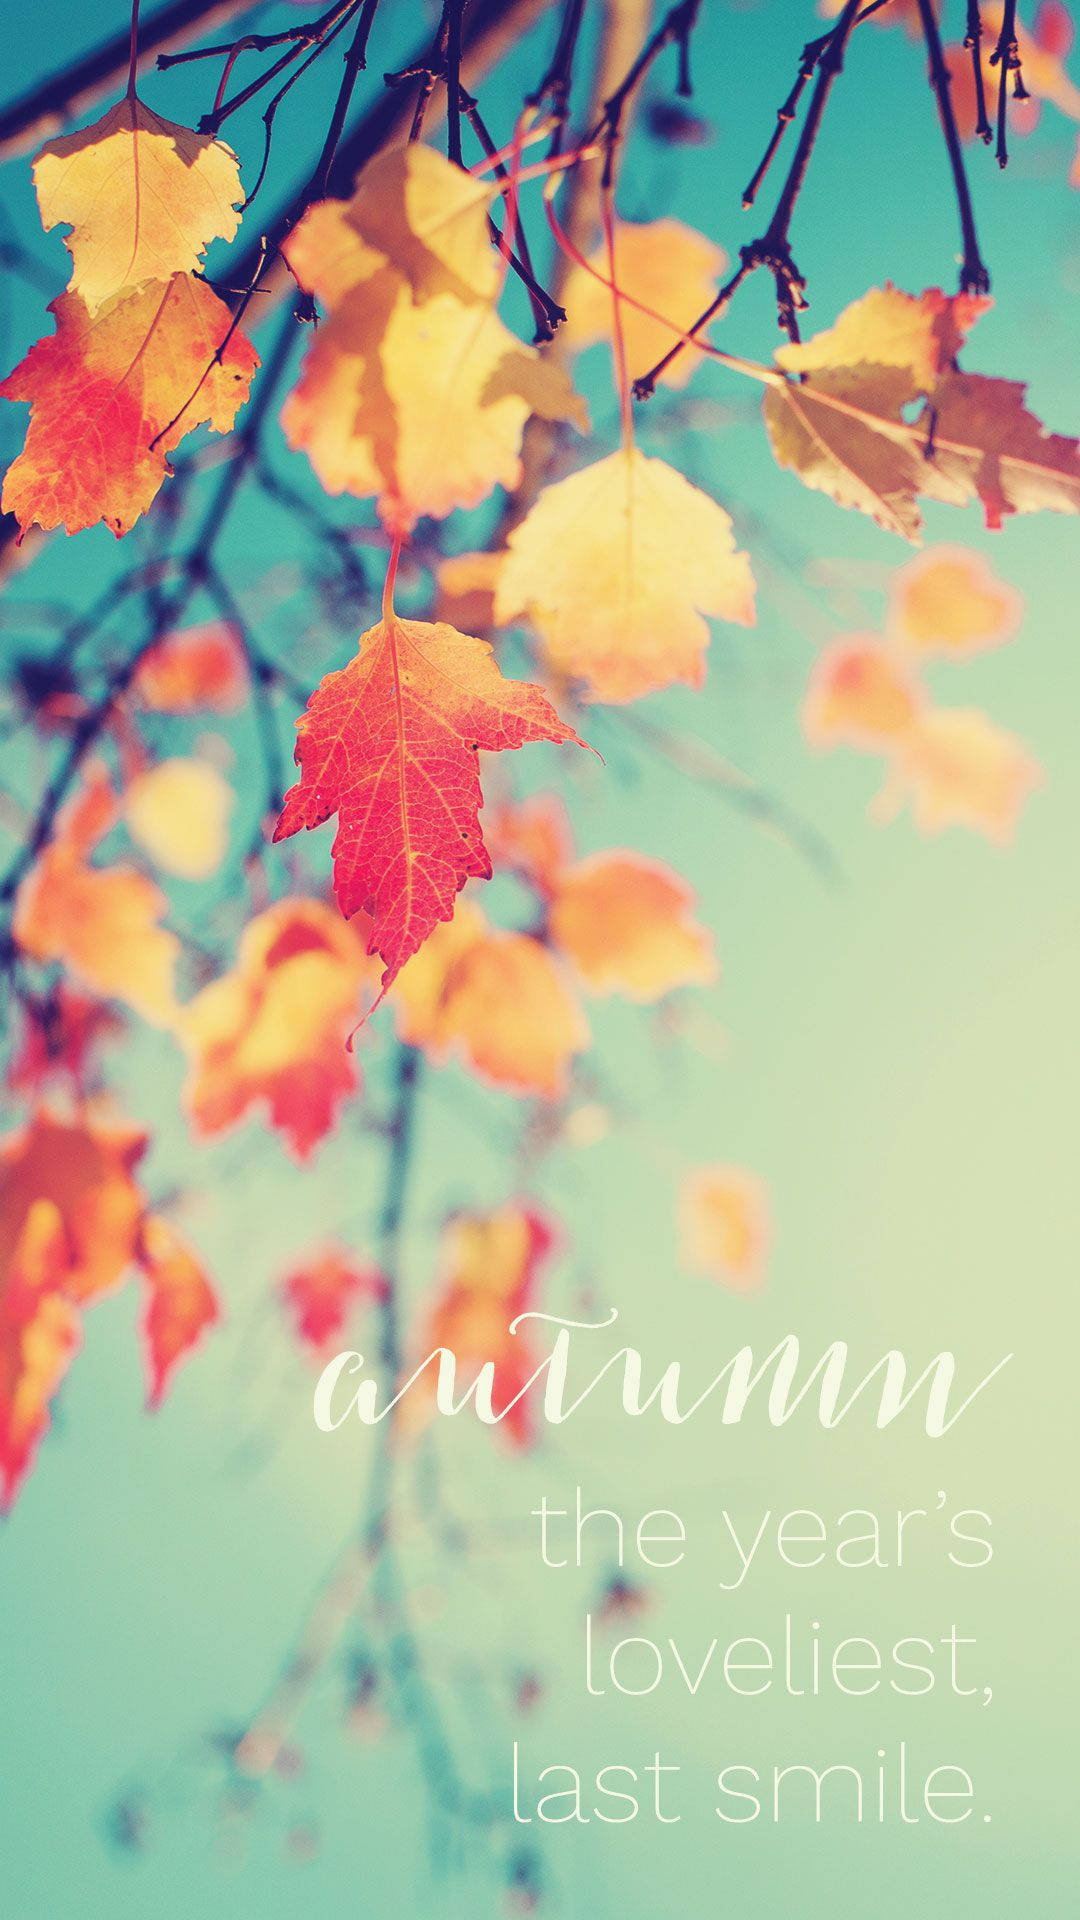 Add a Touch of Autumn to Your Iphone with this Beautiful Wallpaper Wallpaper